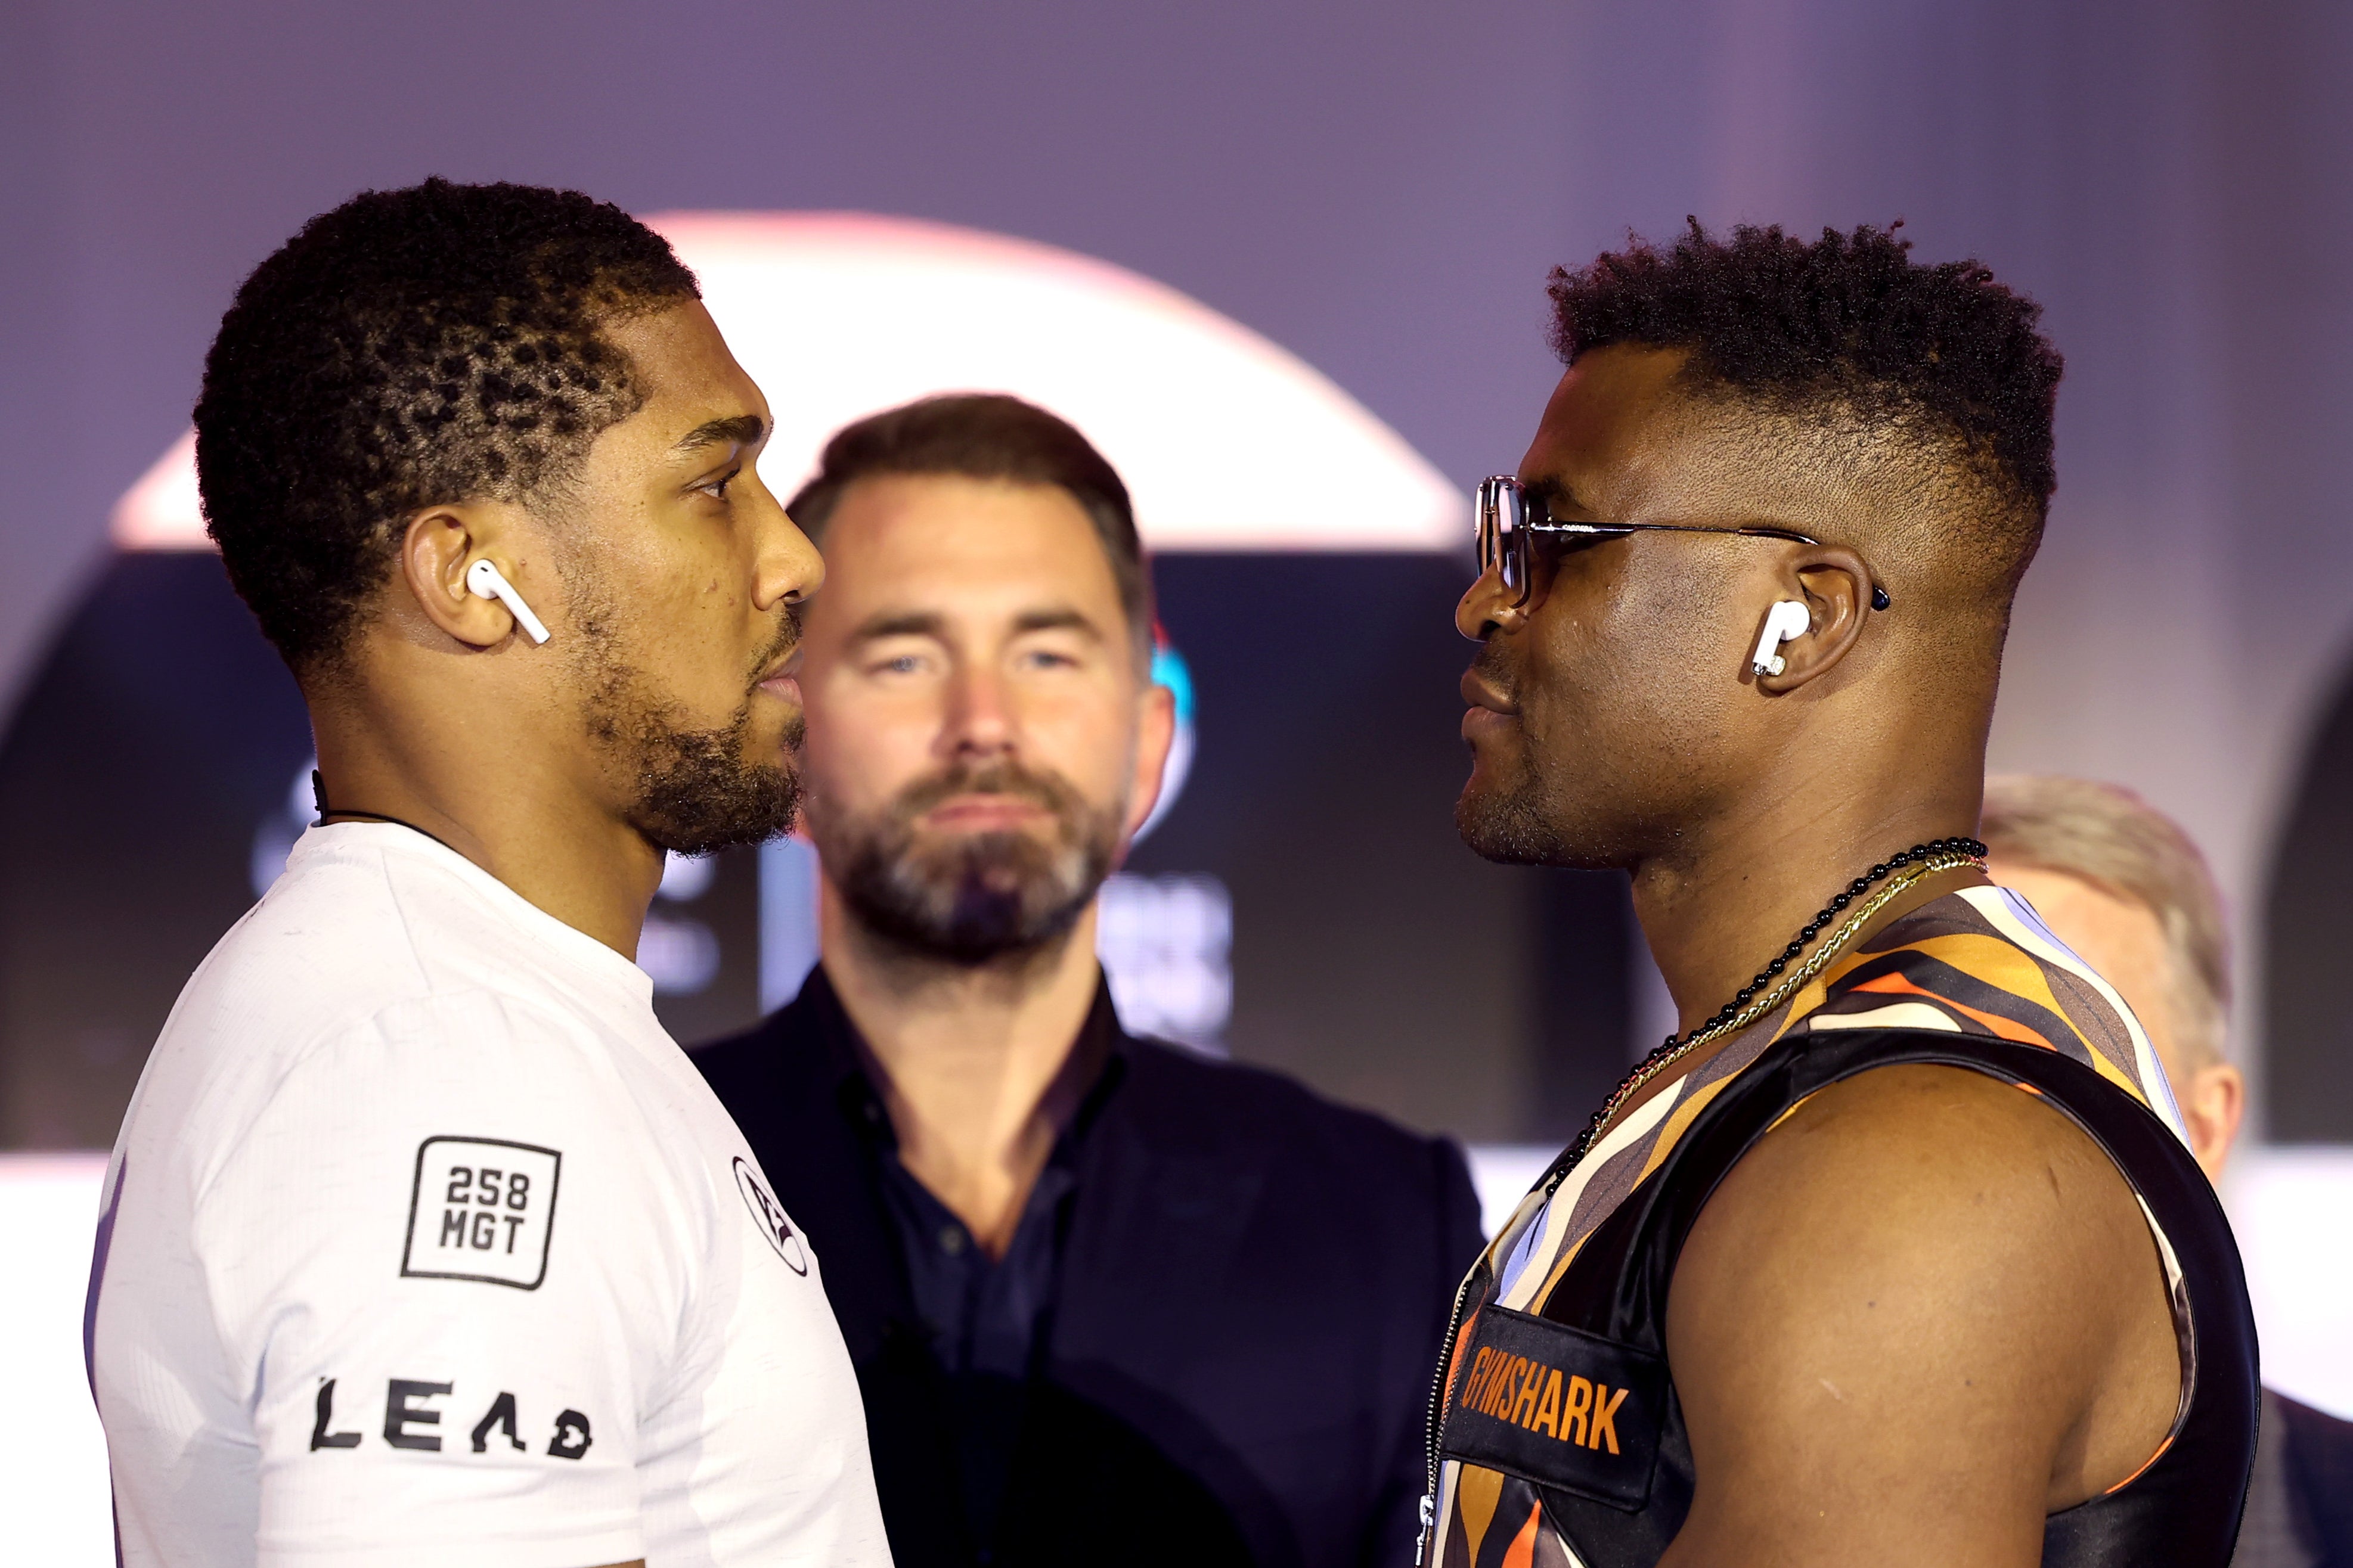 Anthony Joshua (left) faces off with Francis Ngannou ahead of Friday’s fight